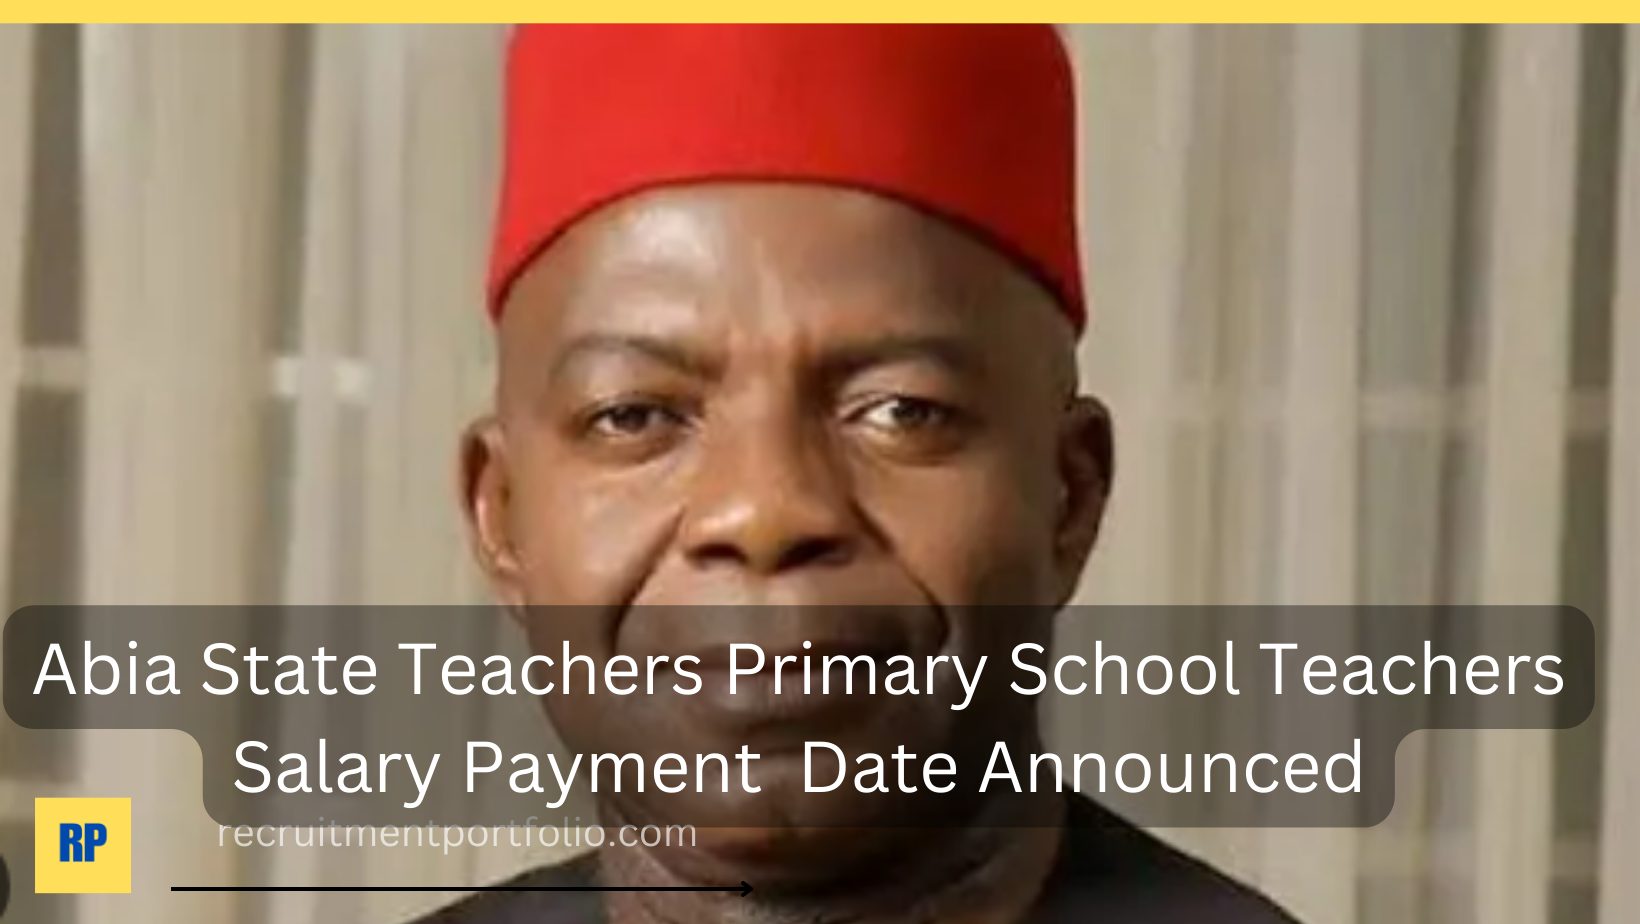 Abia State Teachers Salary Payment Date